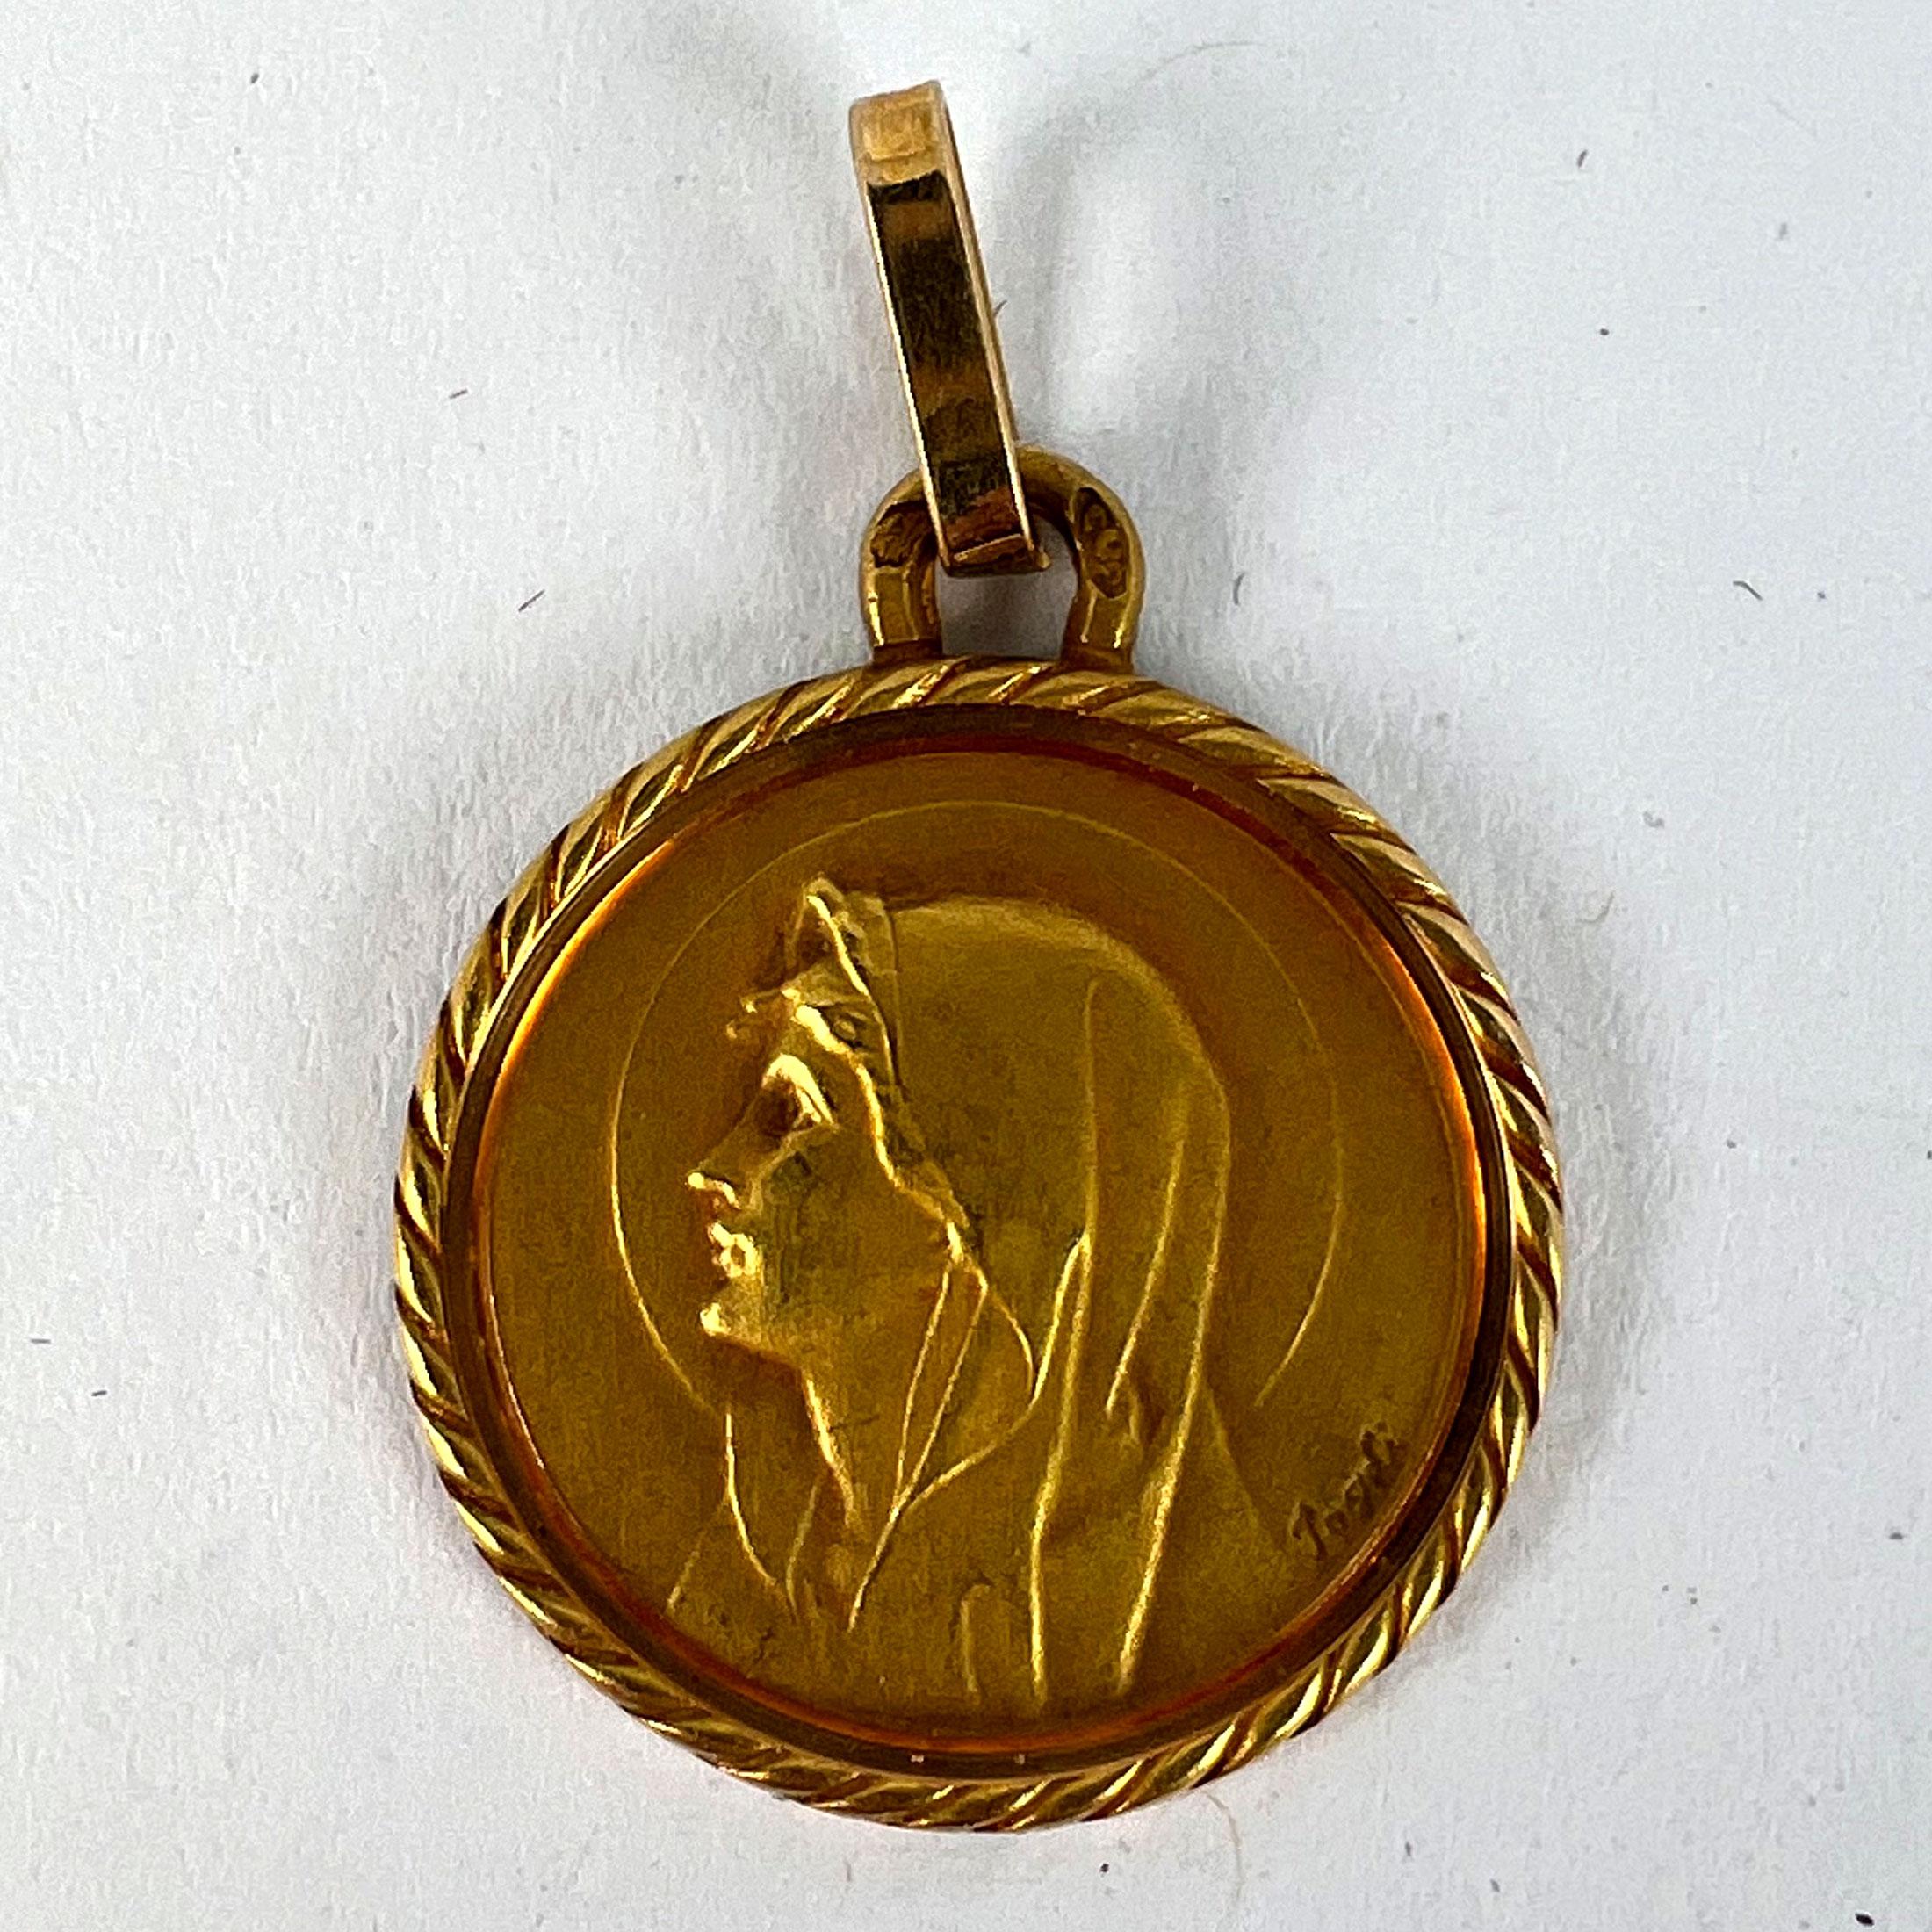 French Perroud Pagdi 18K Yellow Gold Virgin Mary Medal Pendant For Sale 7